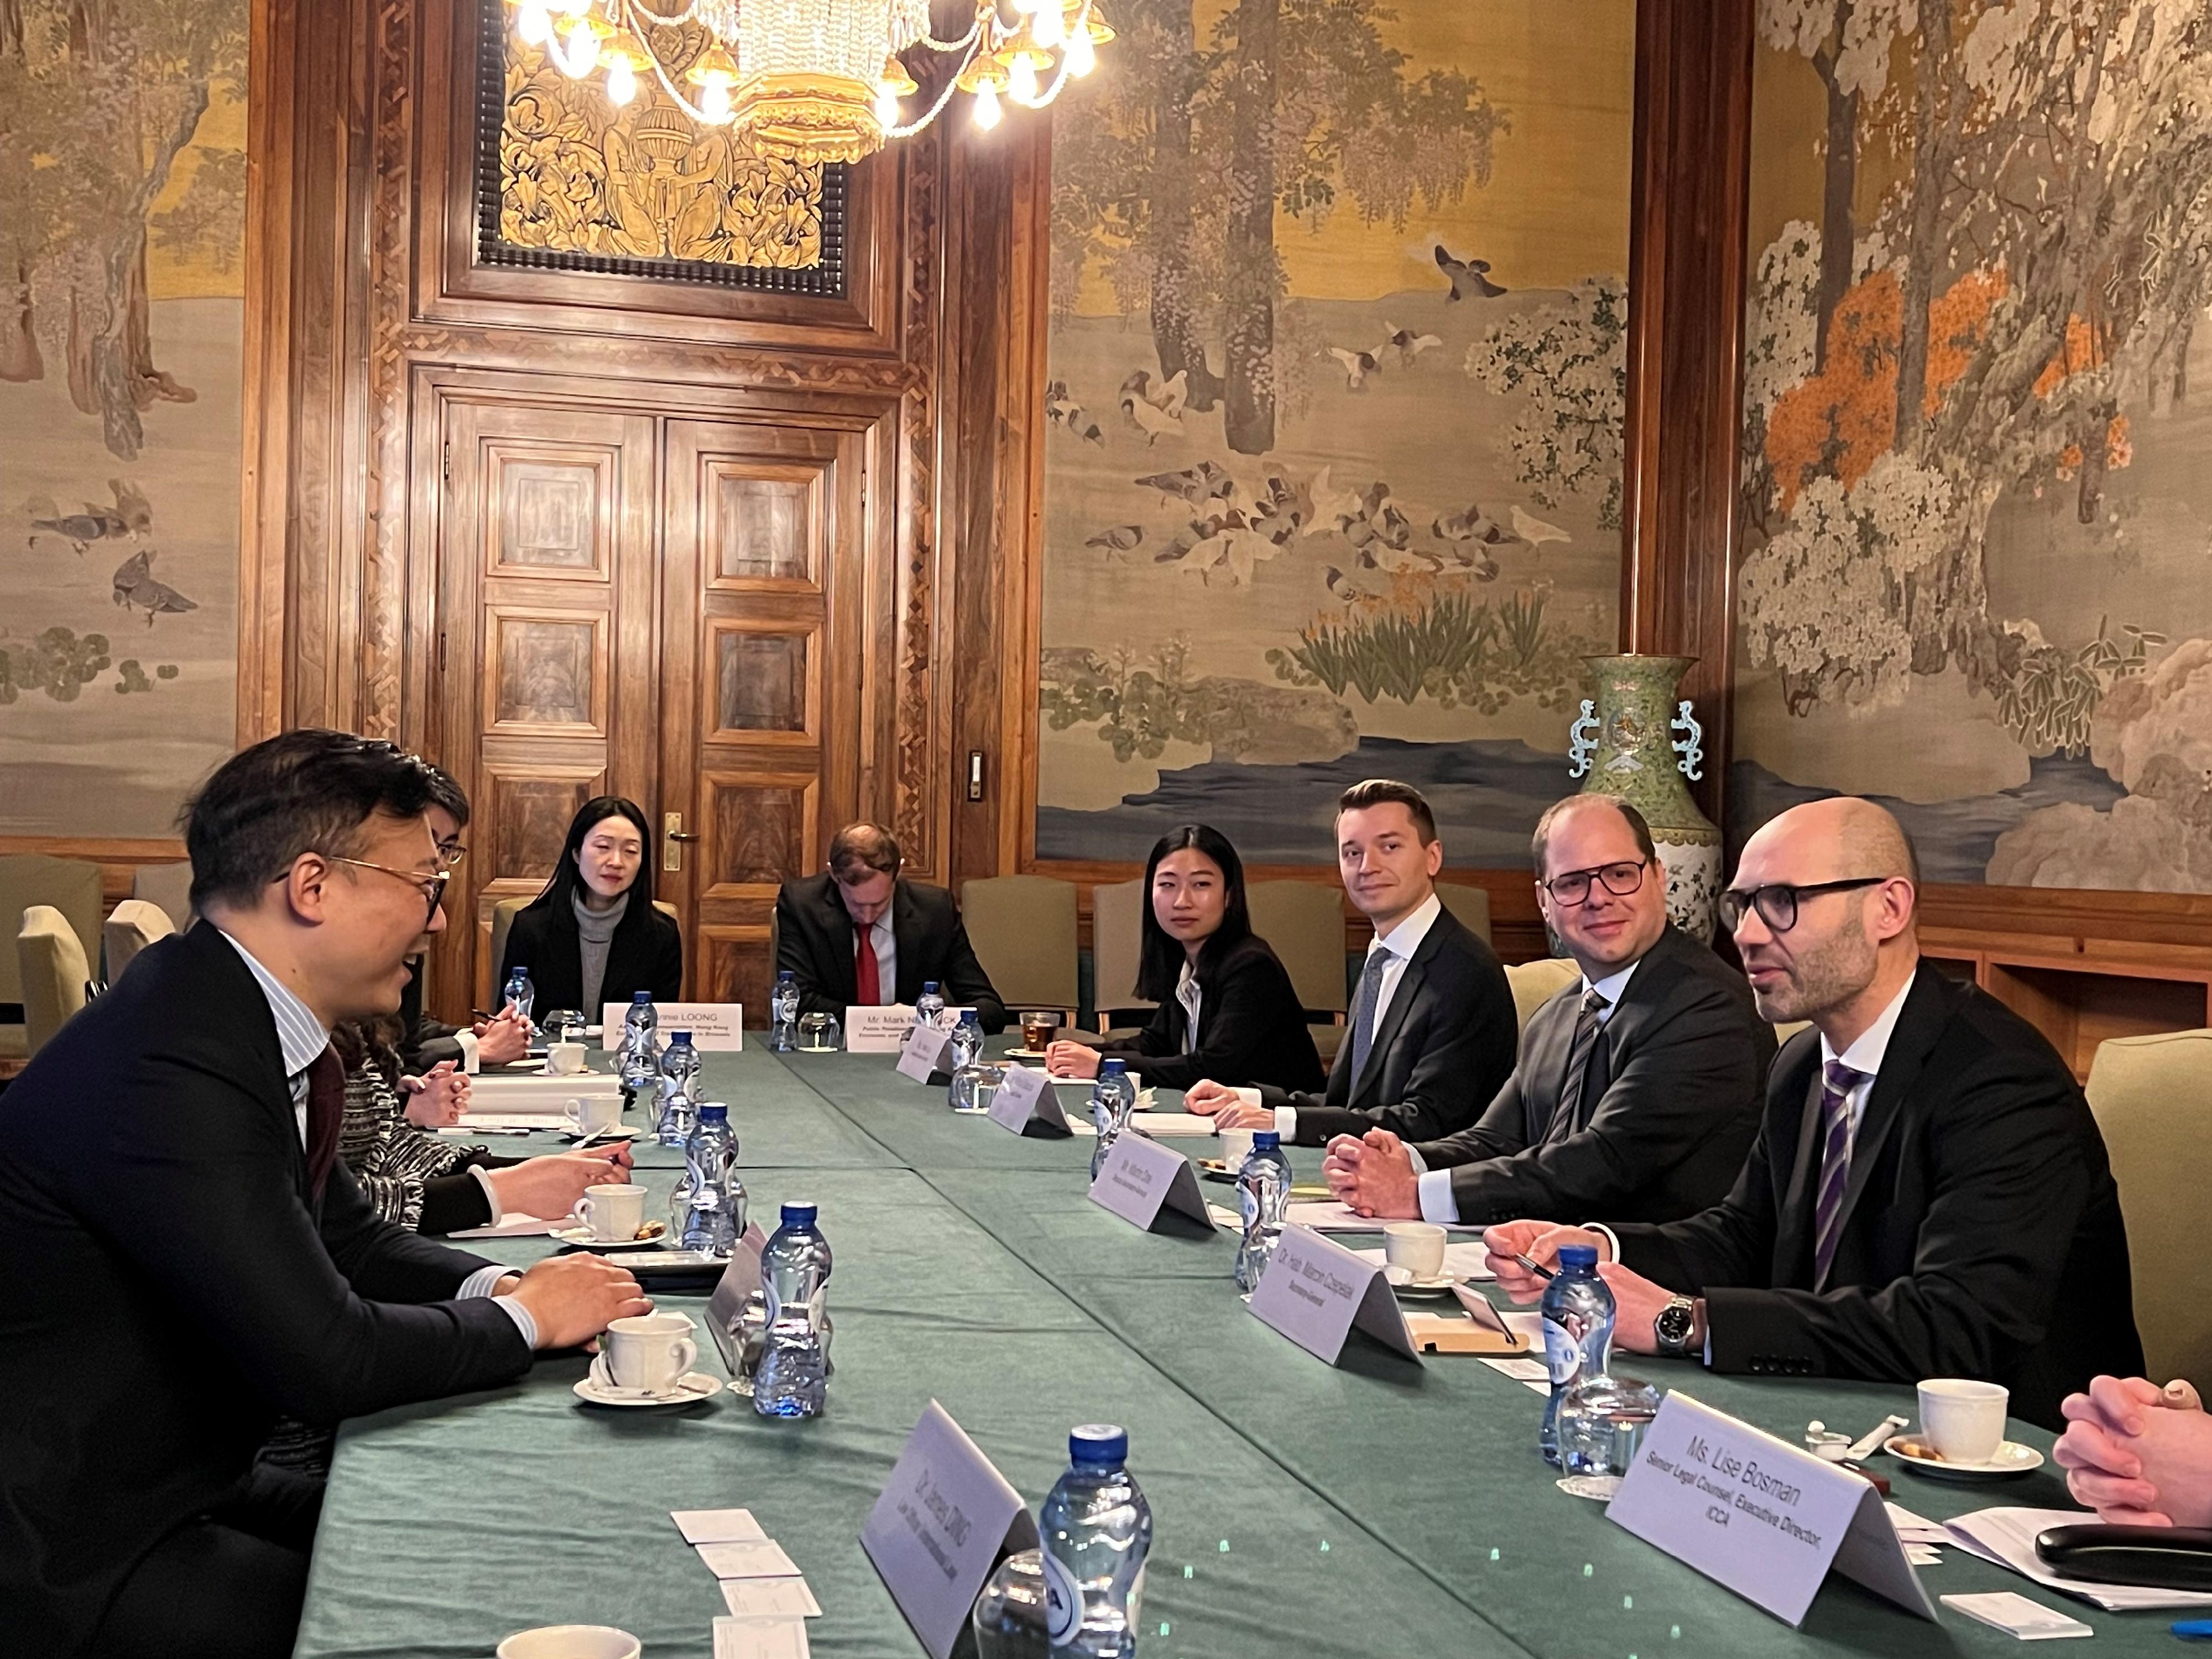 The Deputy Secretary for Justice, Mr Cheung Kwok-kwan (first left), met with the Secretary-General of the Permanent Court of Arbitration (PCA), Dr Hab Marcin Czepelak (first right), and PCA's senior officers in The Hague, the Netherlands, on March 10 (The Hague time).
